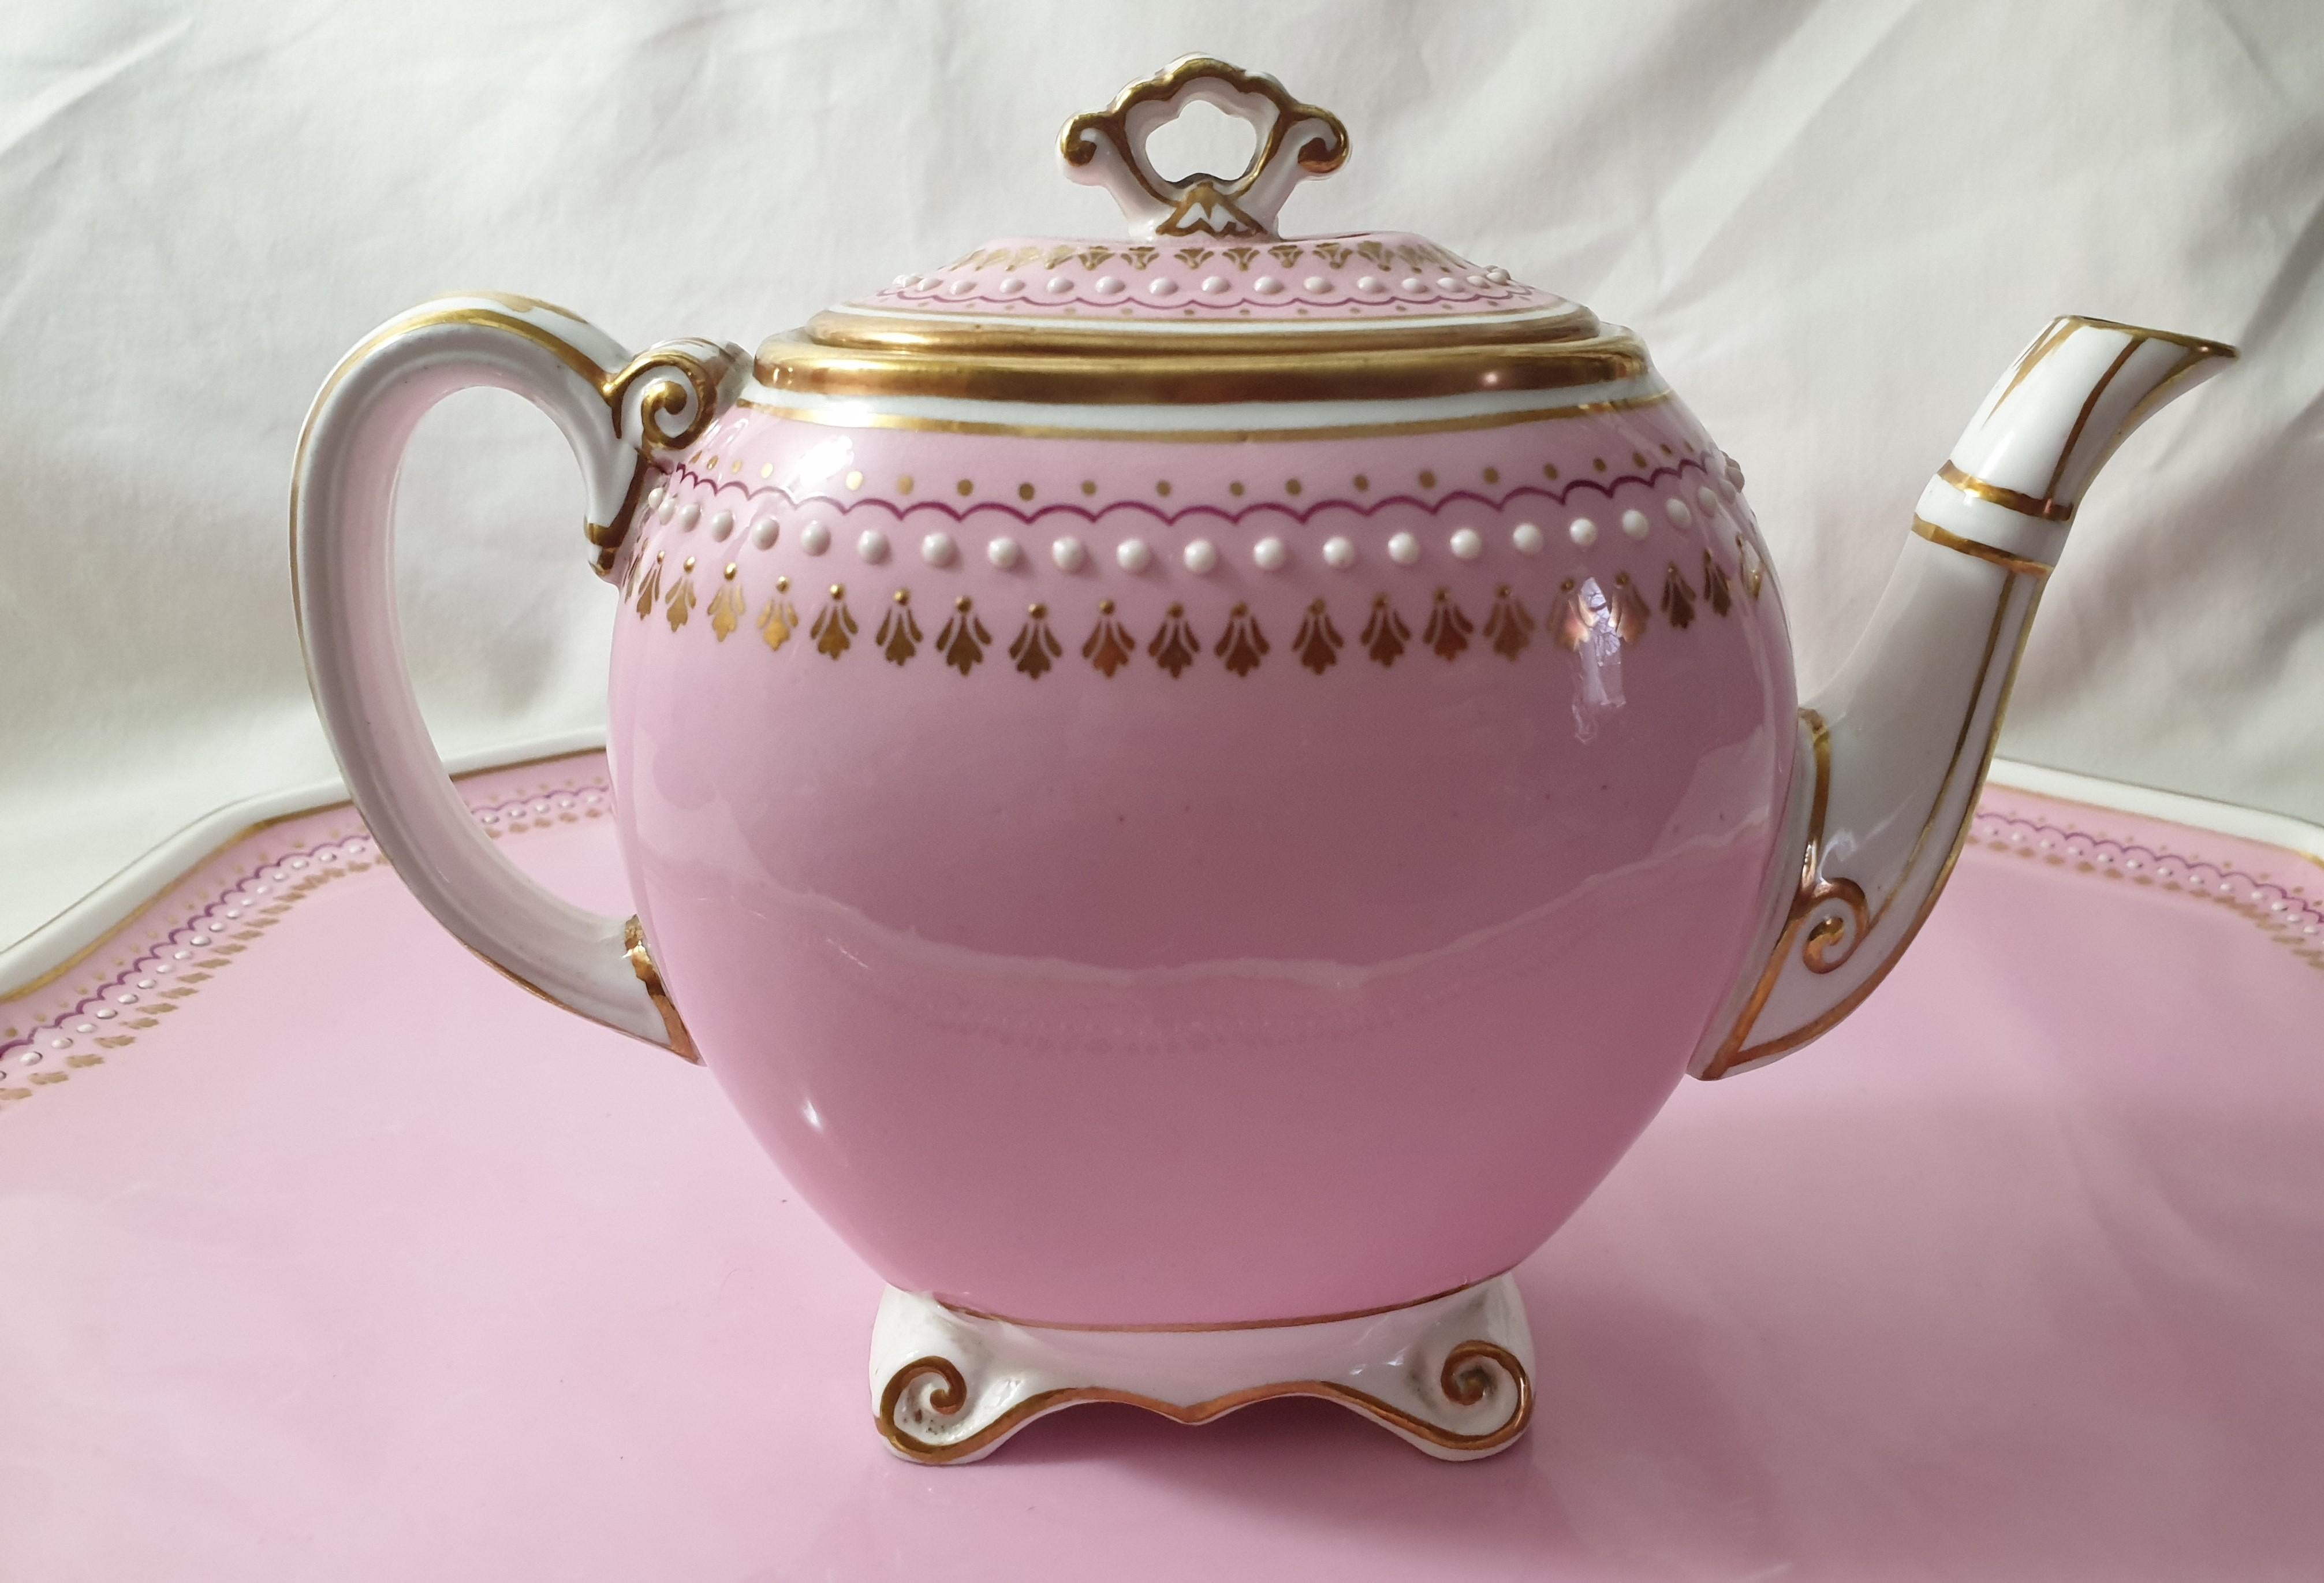 Very rare pink Minton jeweled cabaret set for 2.
Each piece is jeweled and hand painted. Set is in very good condition, with very little ware.
Dates 1871 impress mark pattern number 5993.
Set comprise of tray, tea-pot with lid, sugar-pot with